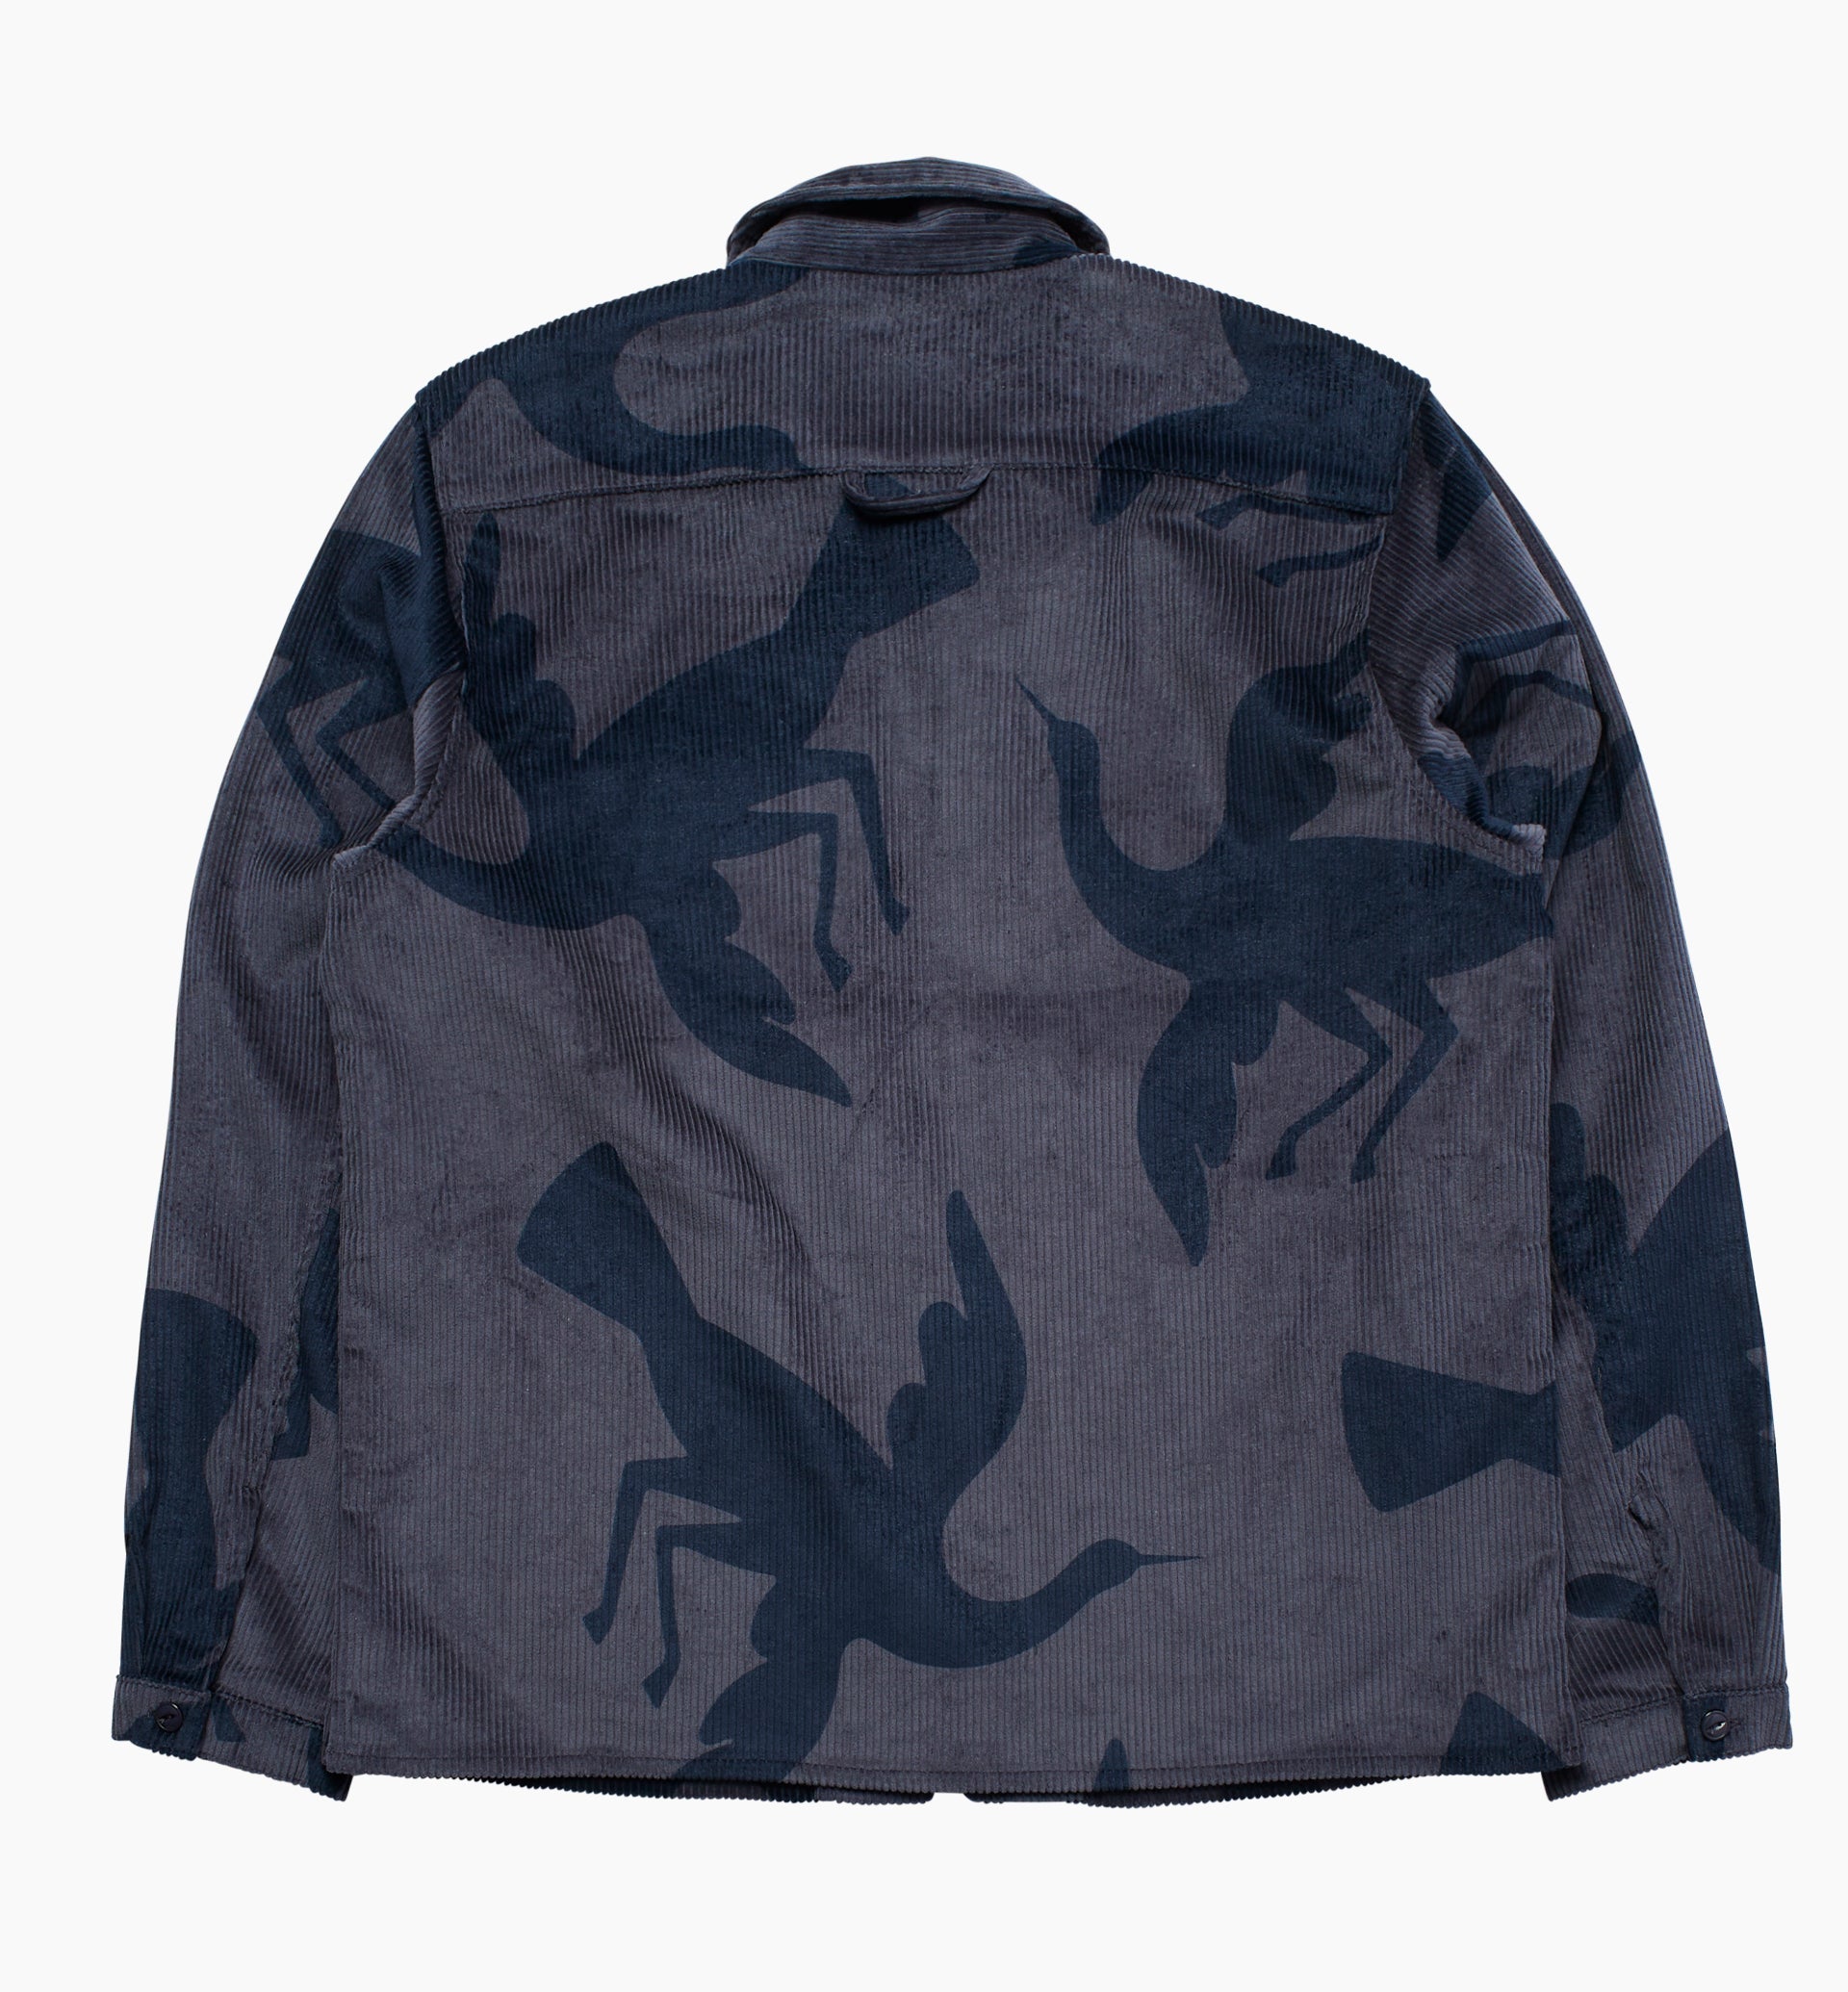 Parra - clipped wings shirt jacket